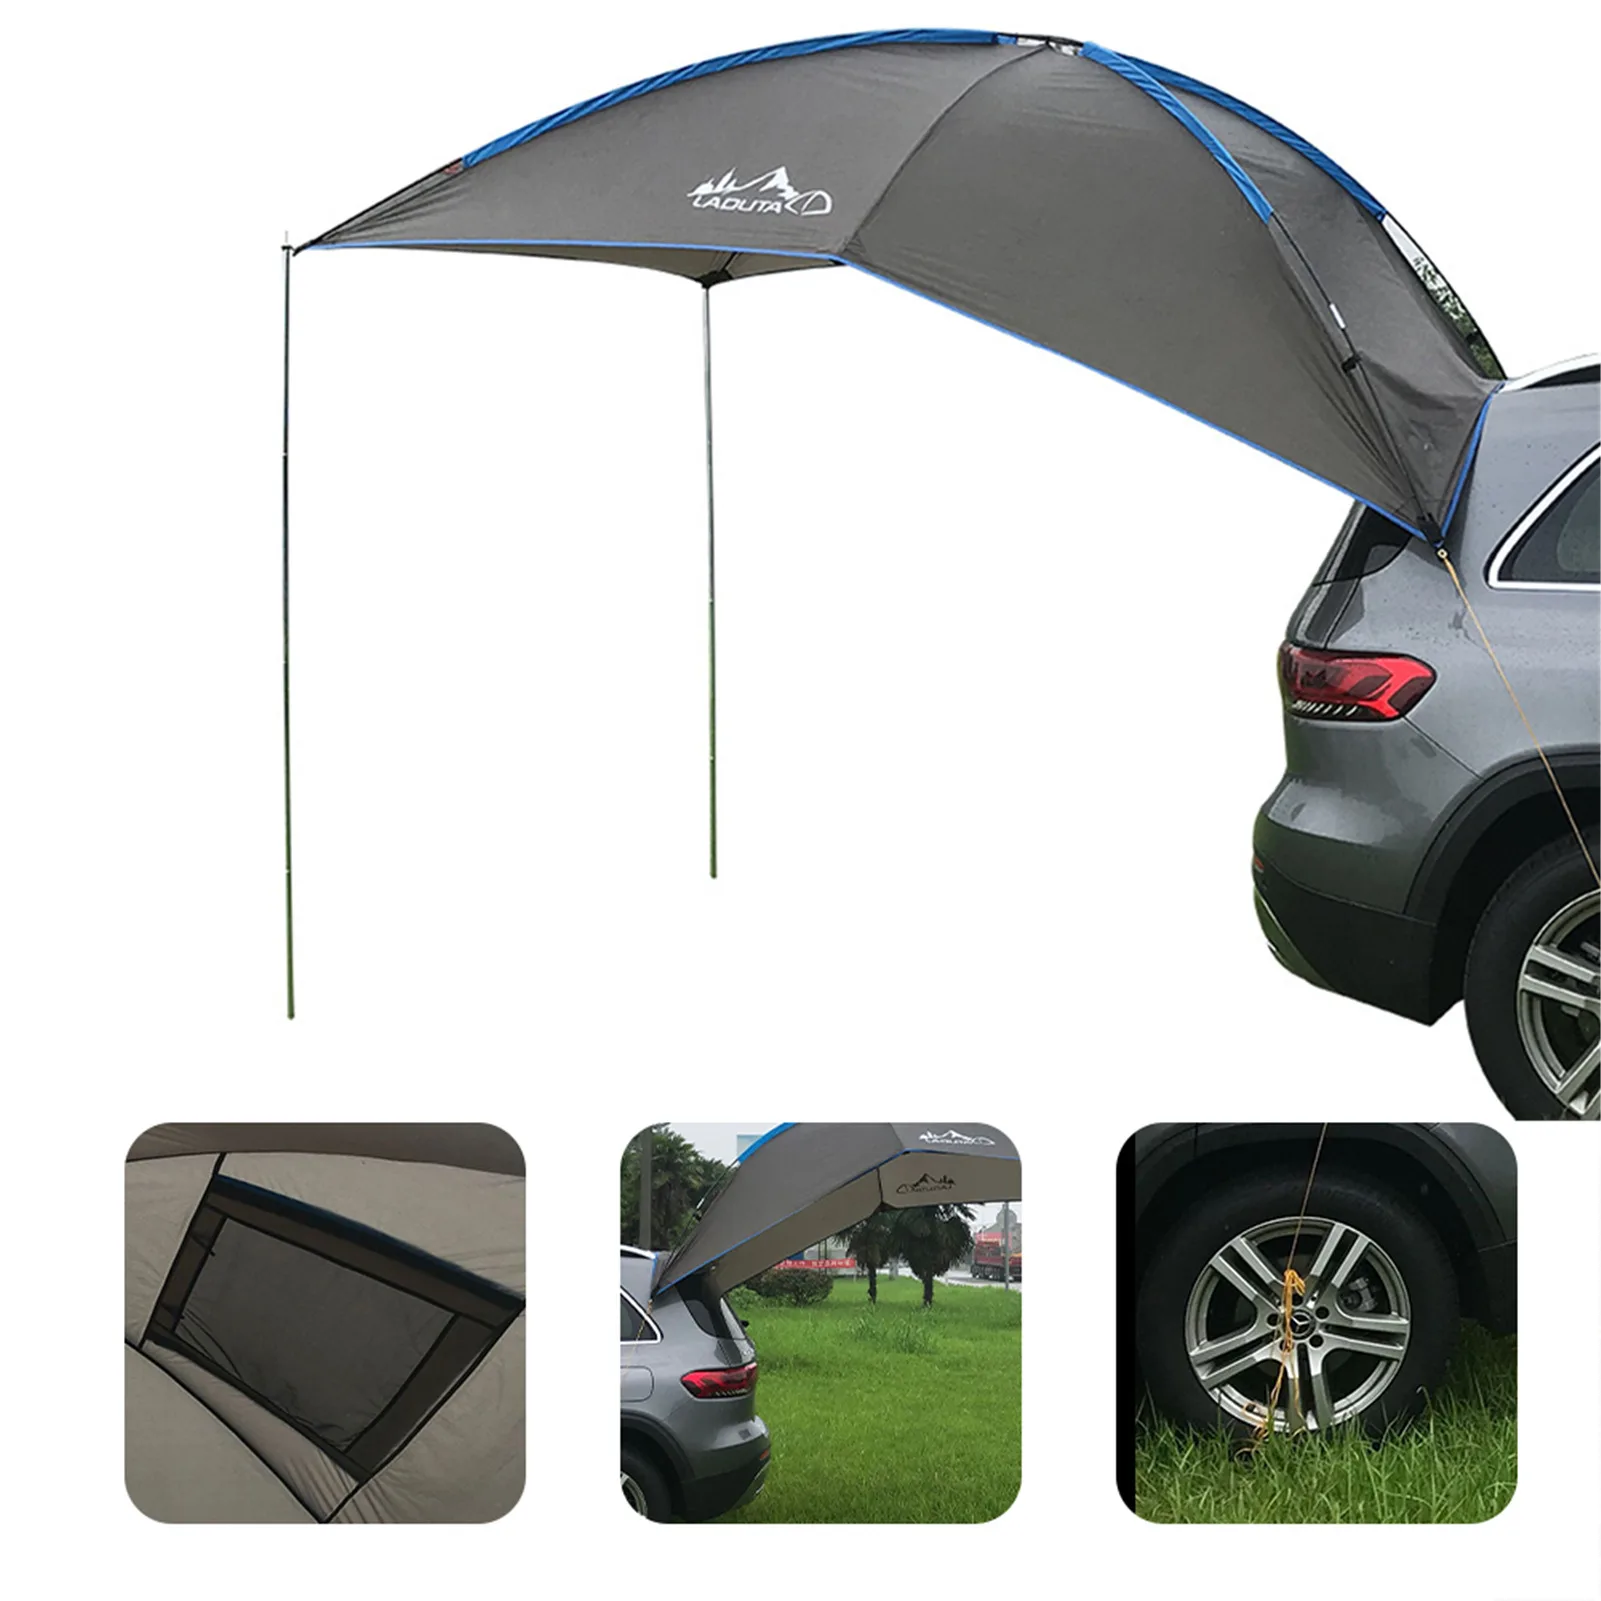 Car Rooftop Awning Waterproof Tear Auto Camping Tent Car Side Tent for SUV MPV Trailer Beach Camping Auto Traveling Tent